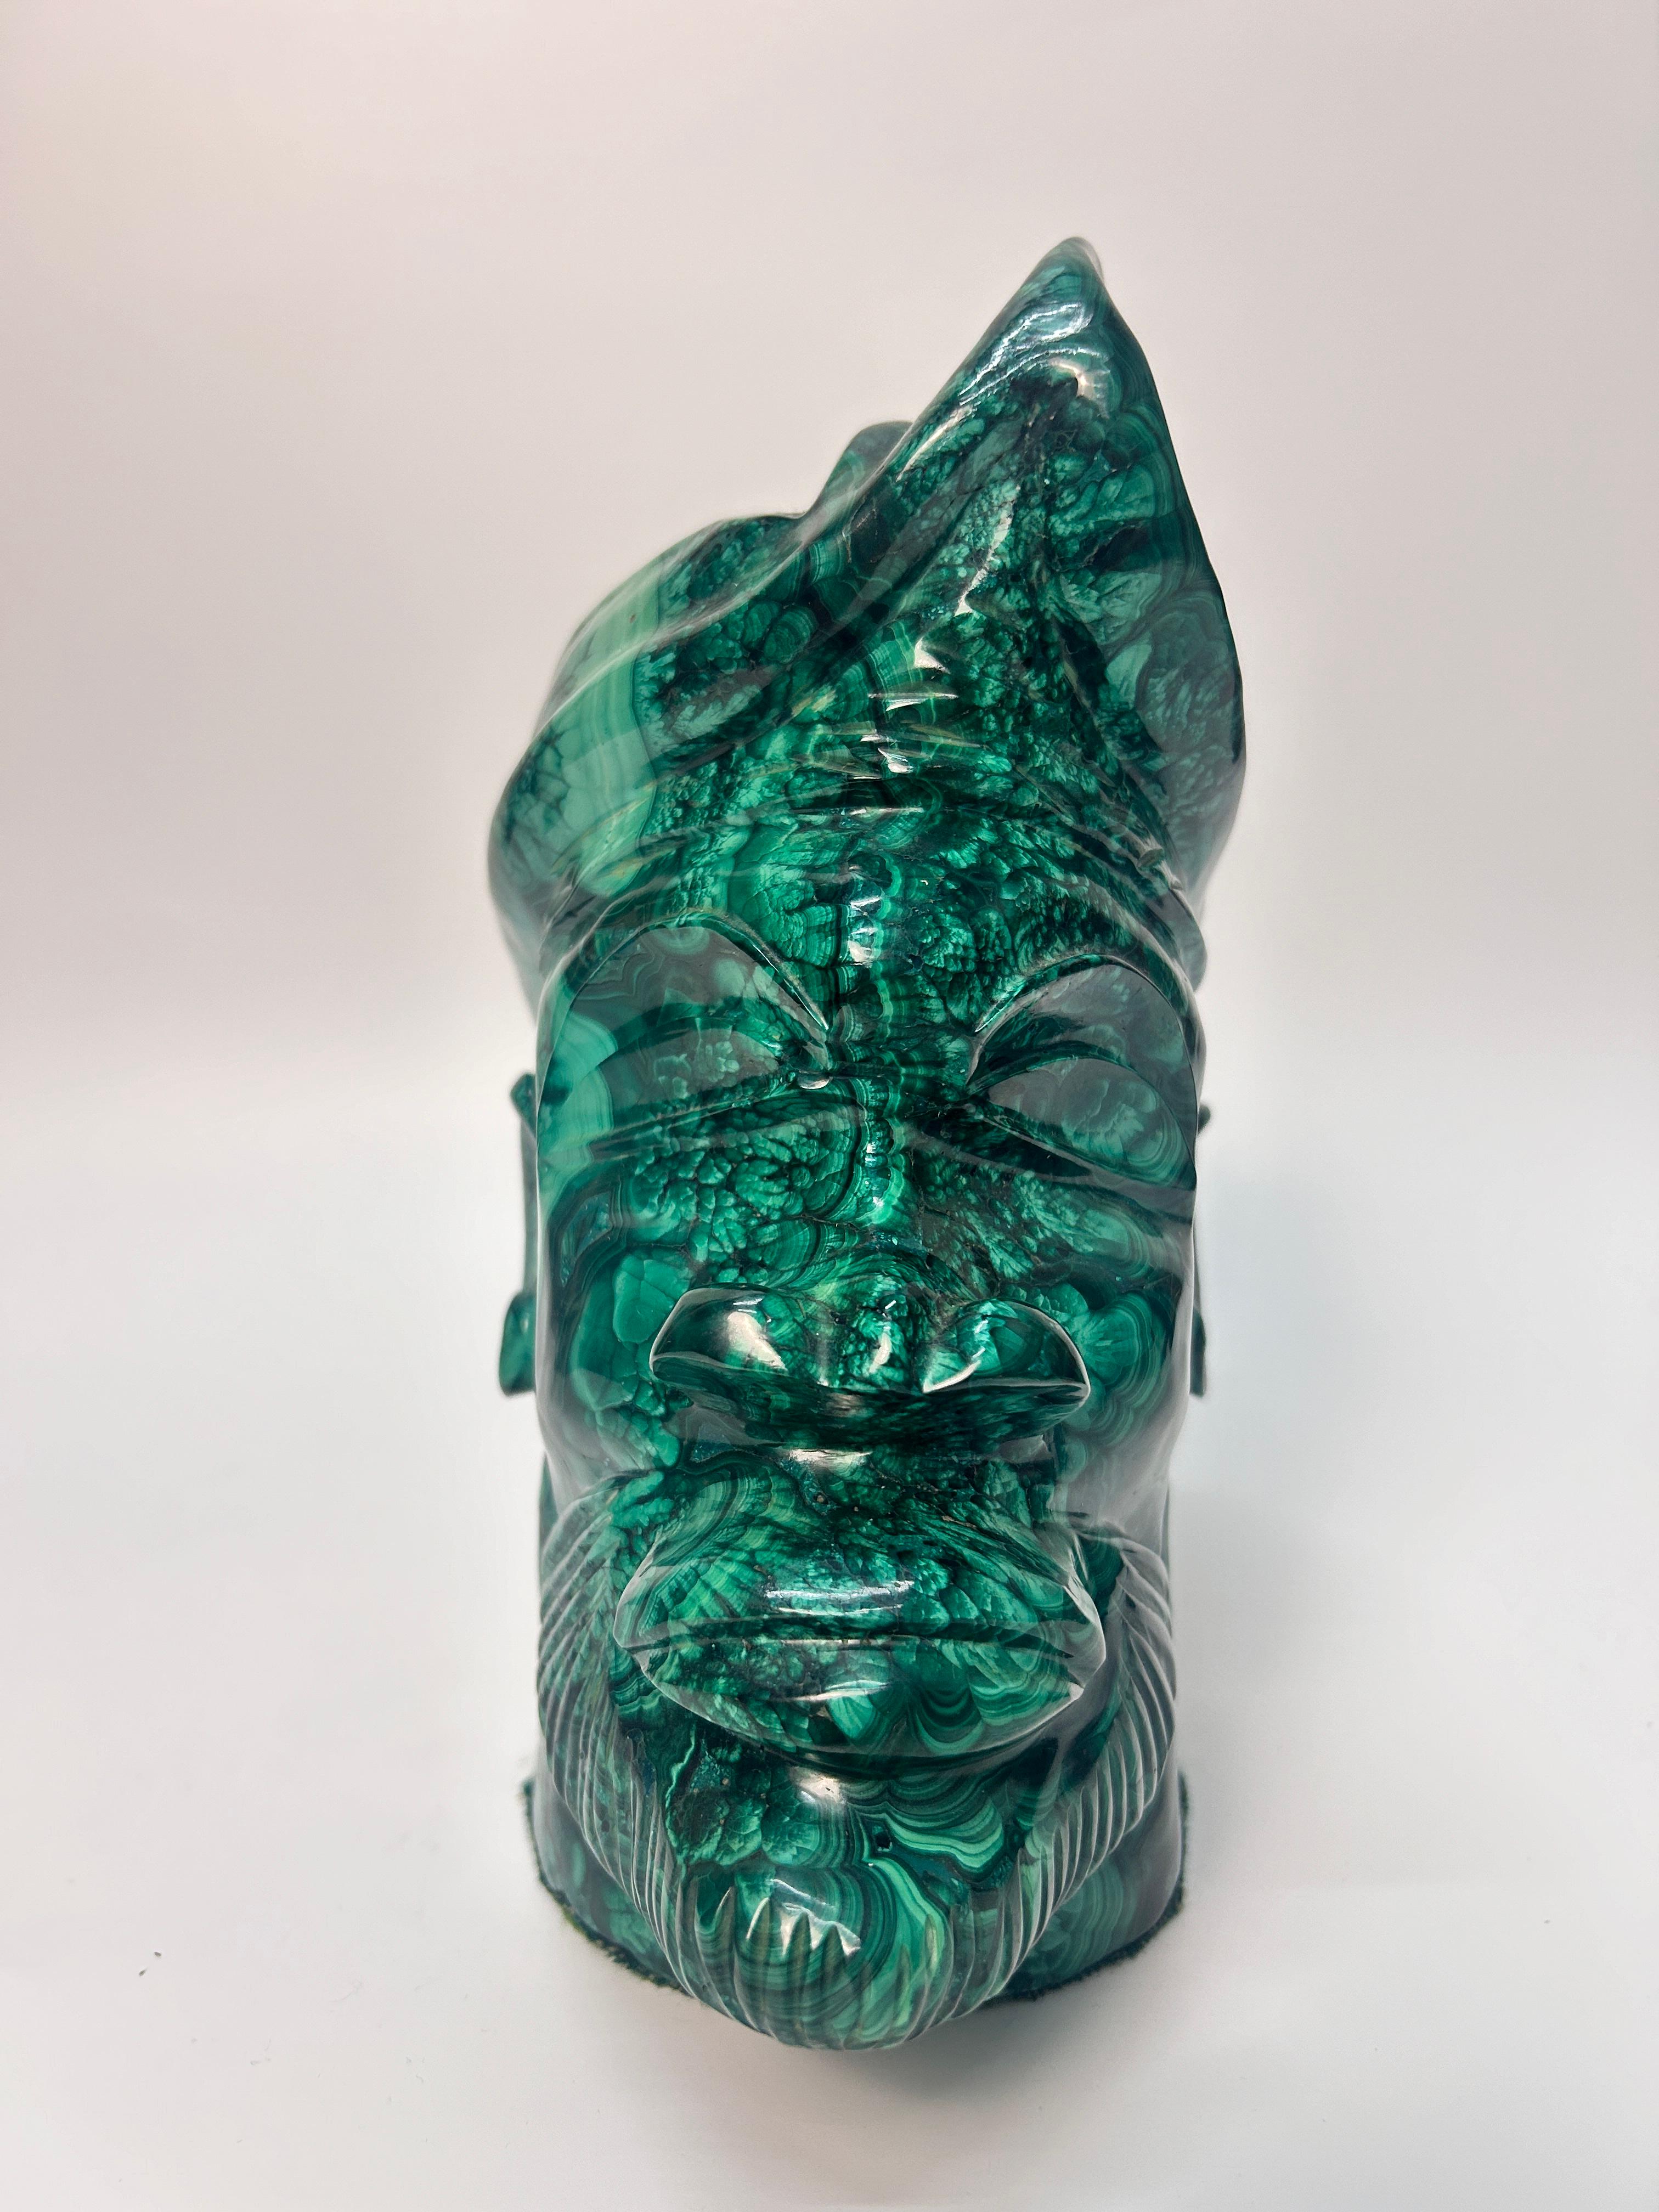 Large Solid African Carved Malachite Head